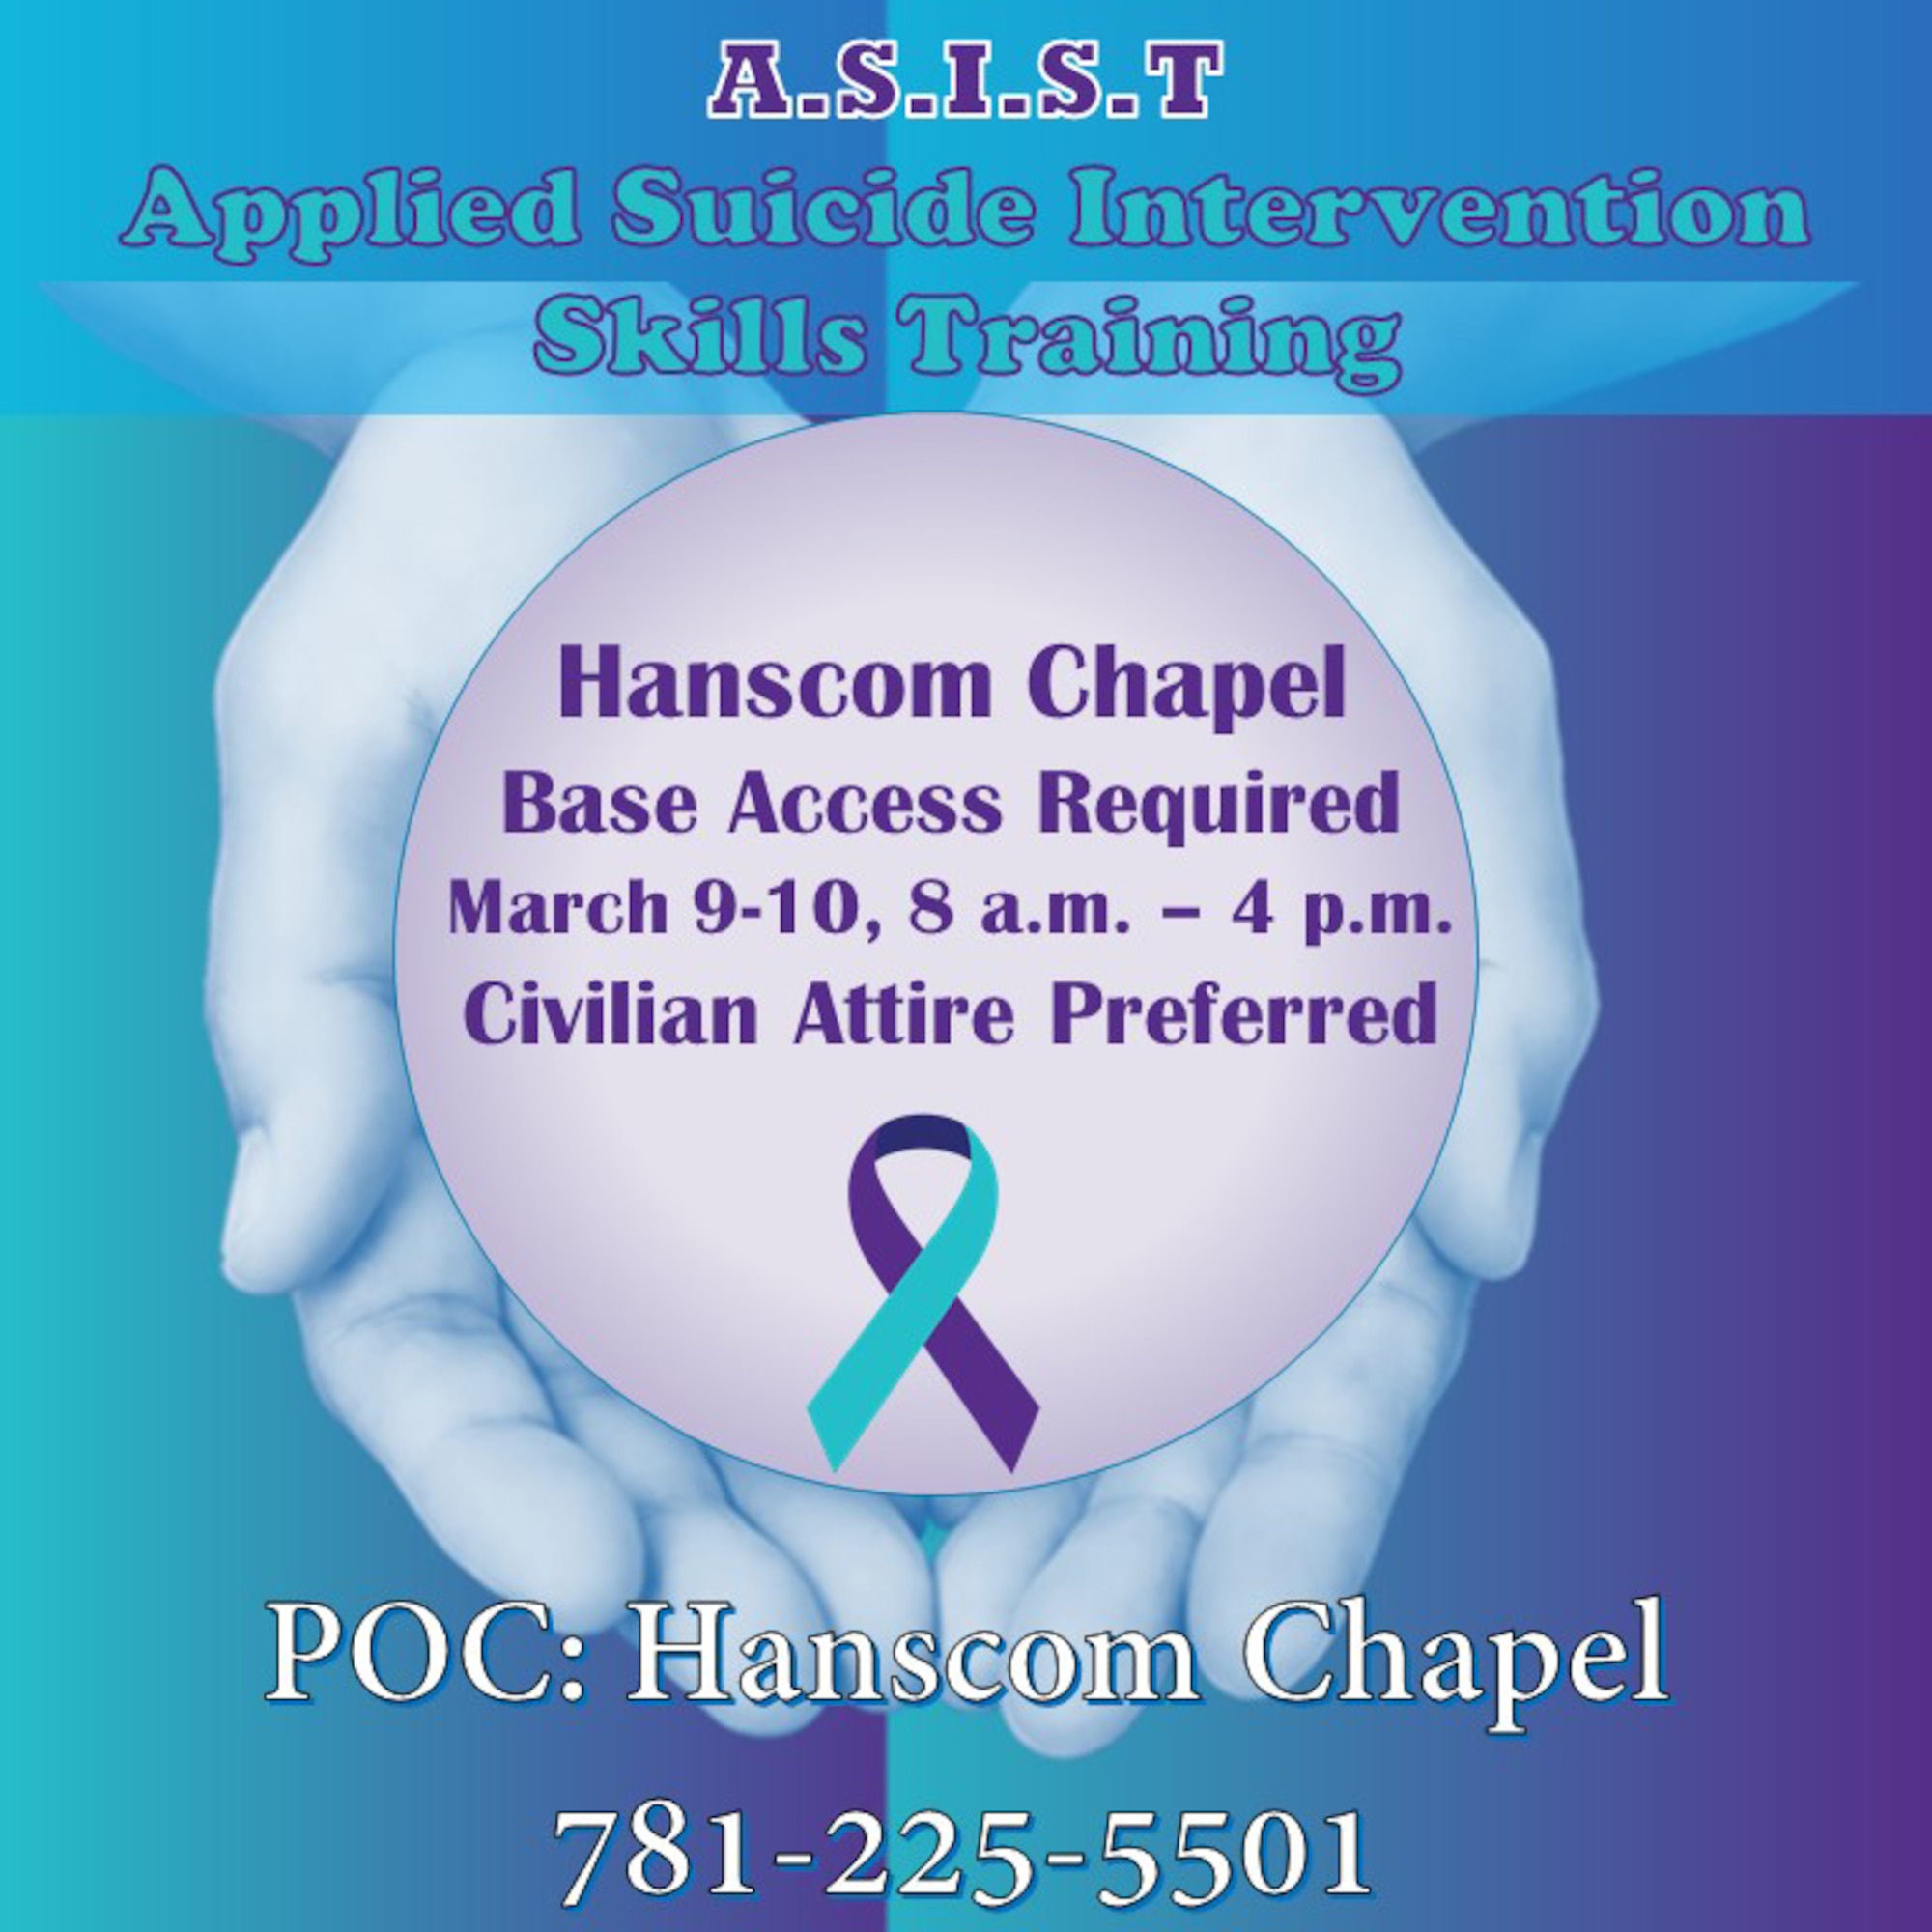 Hanscom Chapel offers suicide prevention ASISTance in March